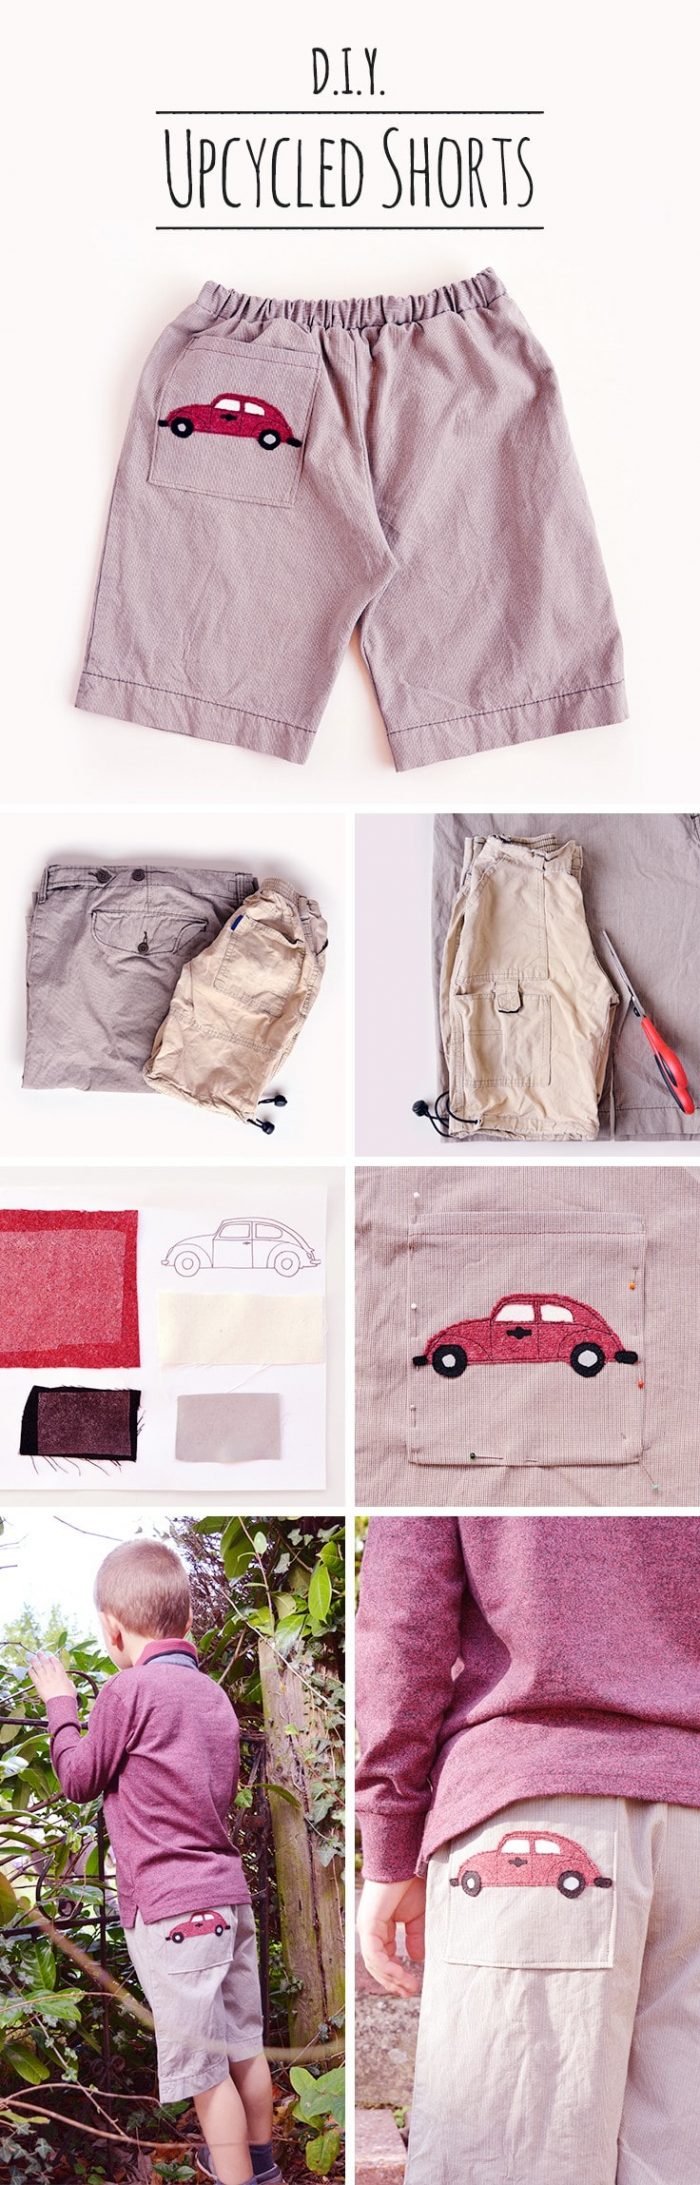 Sew your own beetle shorts, create your own shorts pattern (sponsored by Volkswagen)